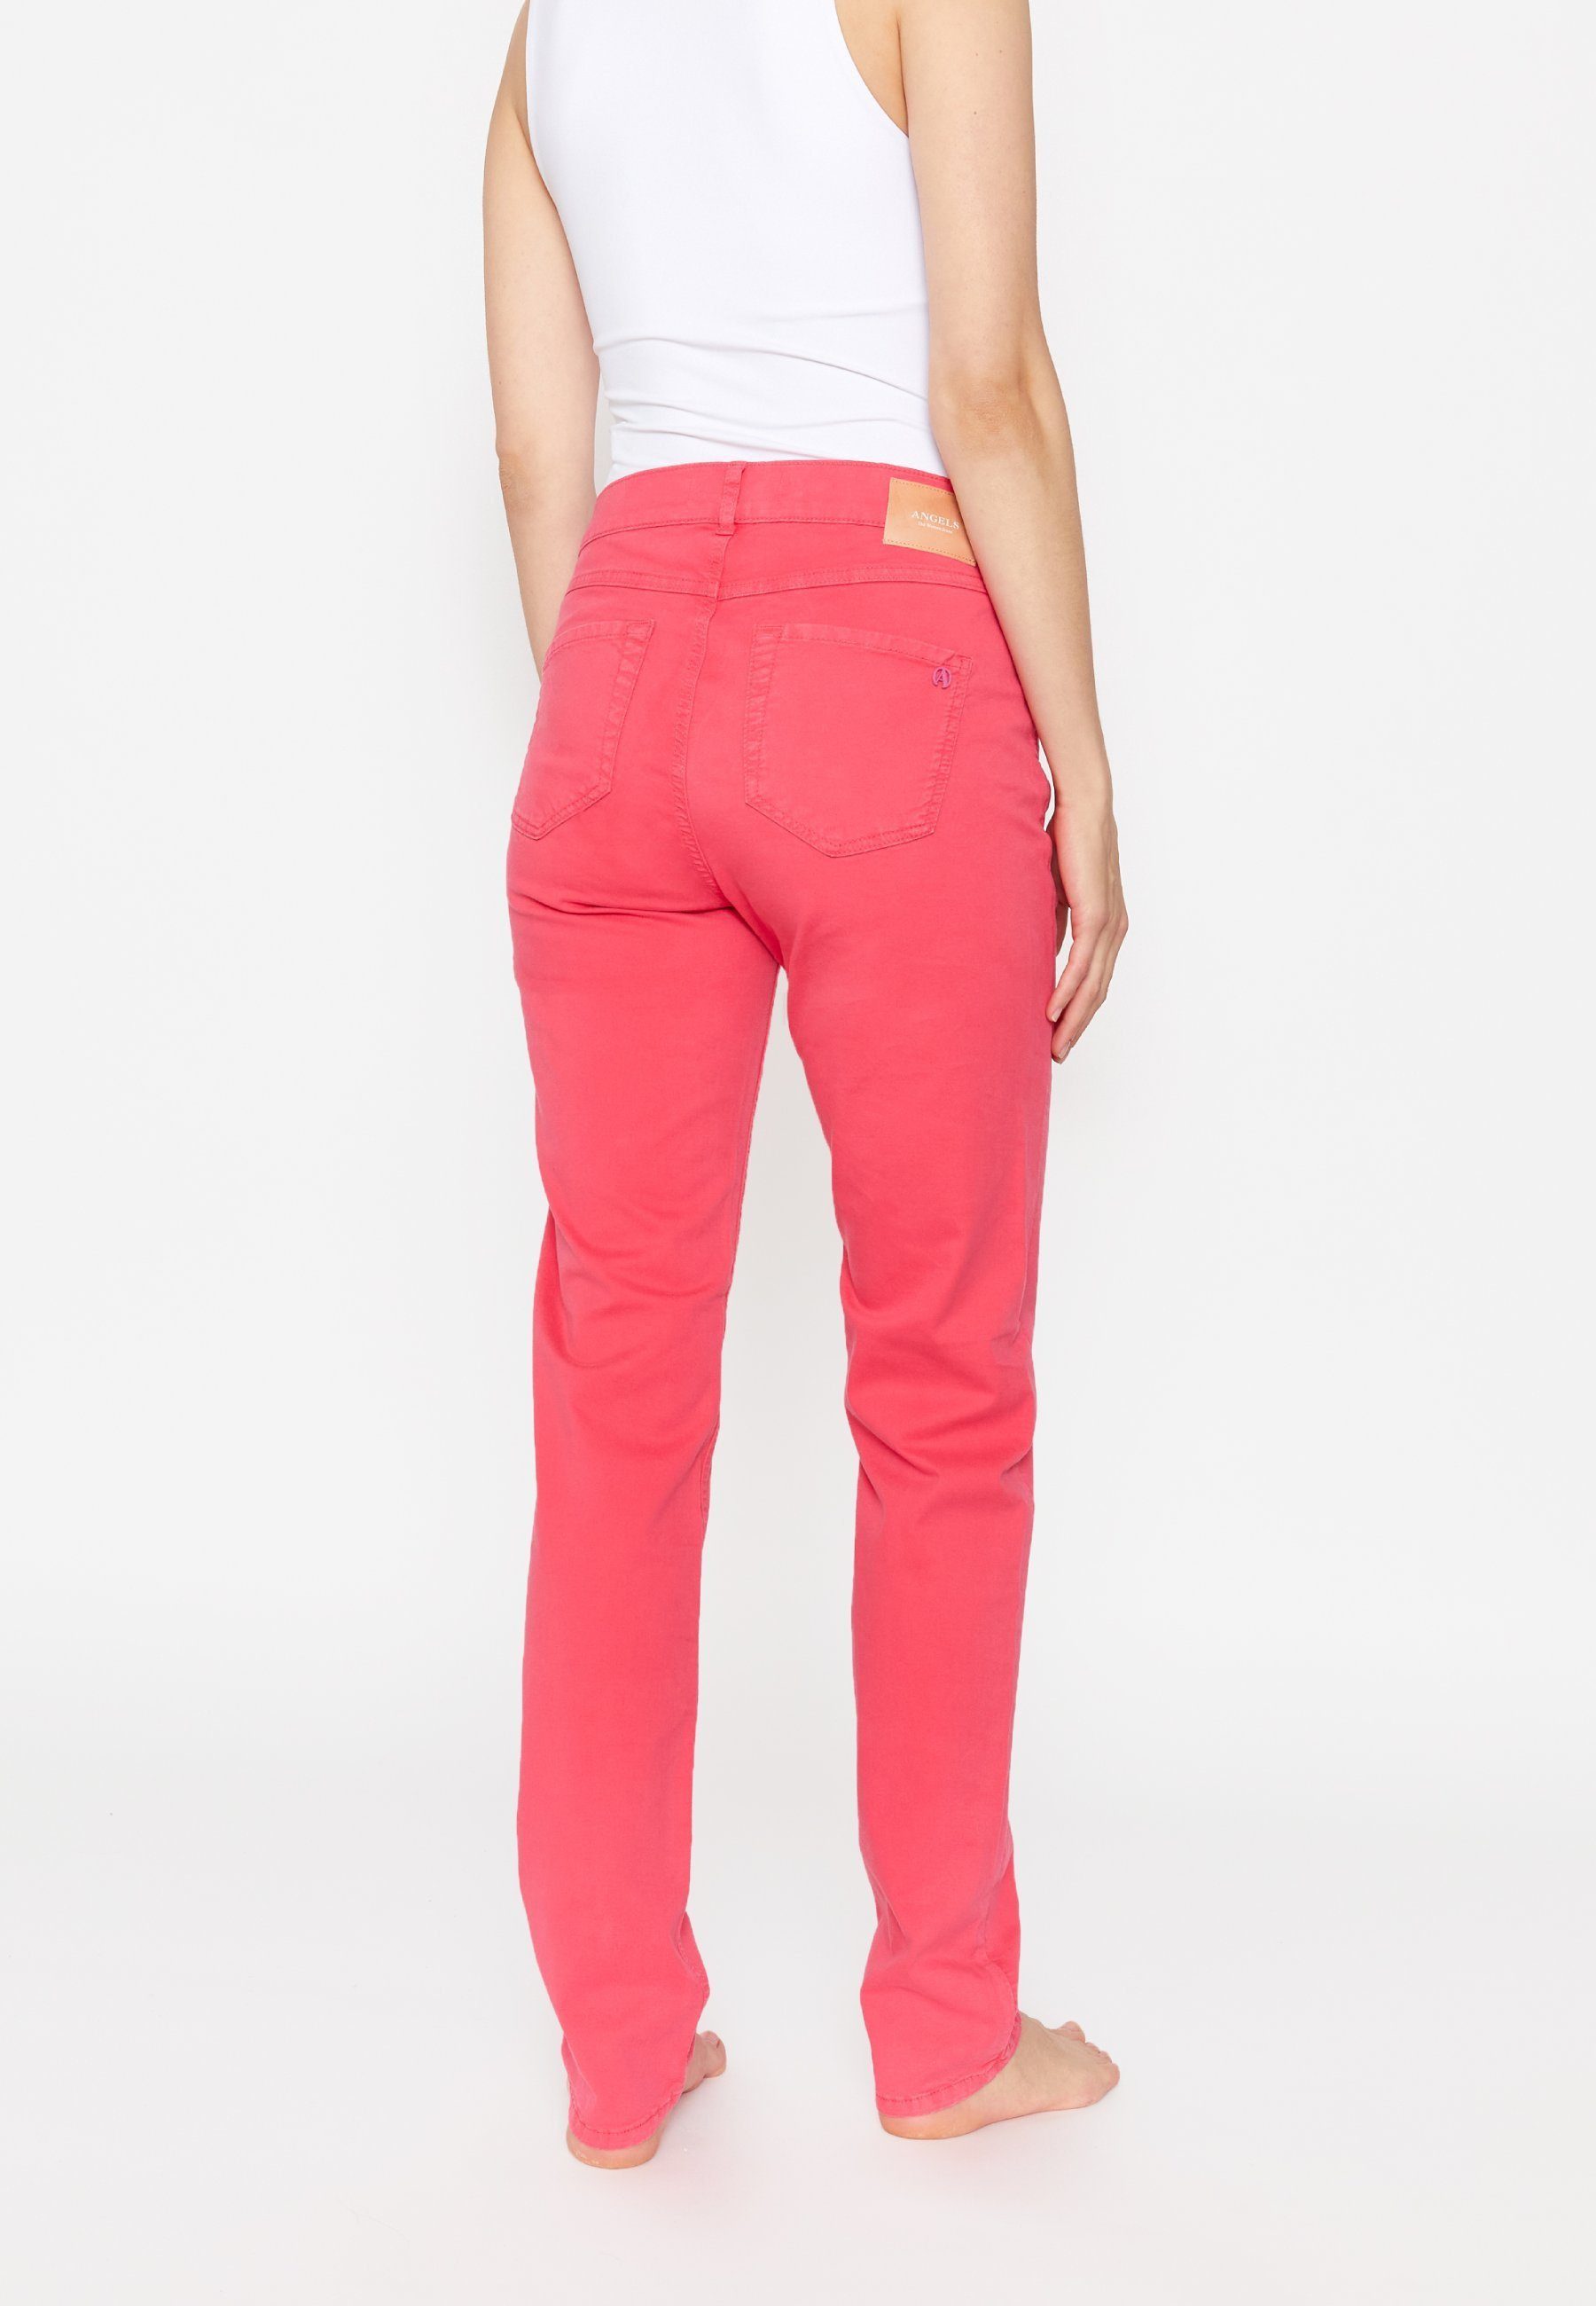 Denim mit ANGELS Jeans Ton-in-Ton-Nähte Cici Straight-Jeans pink Coloured